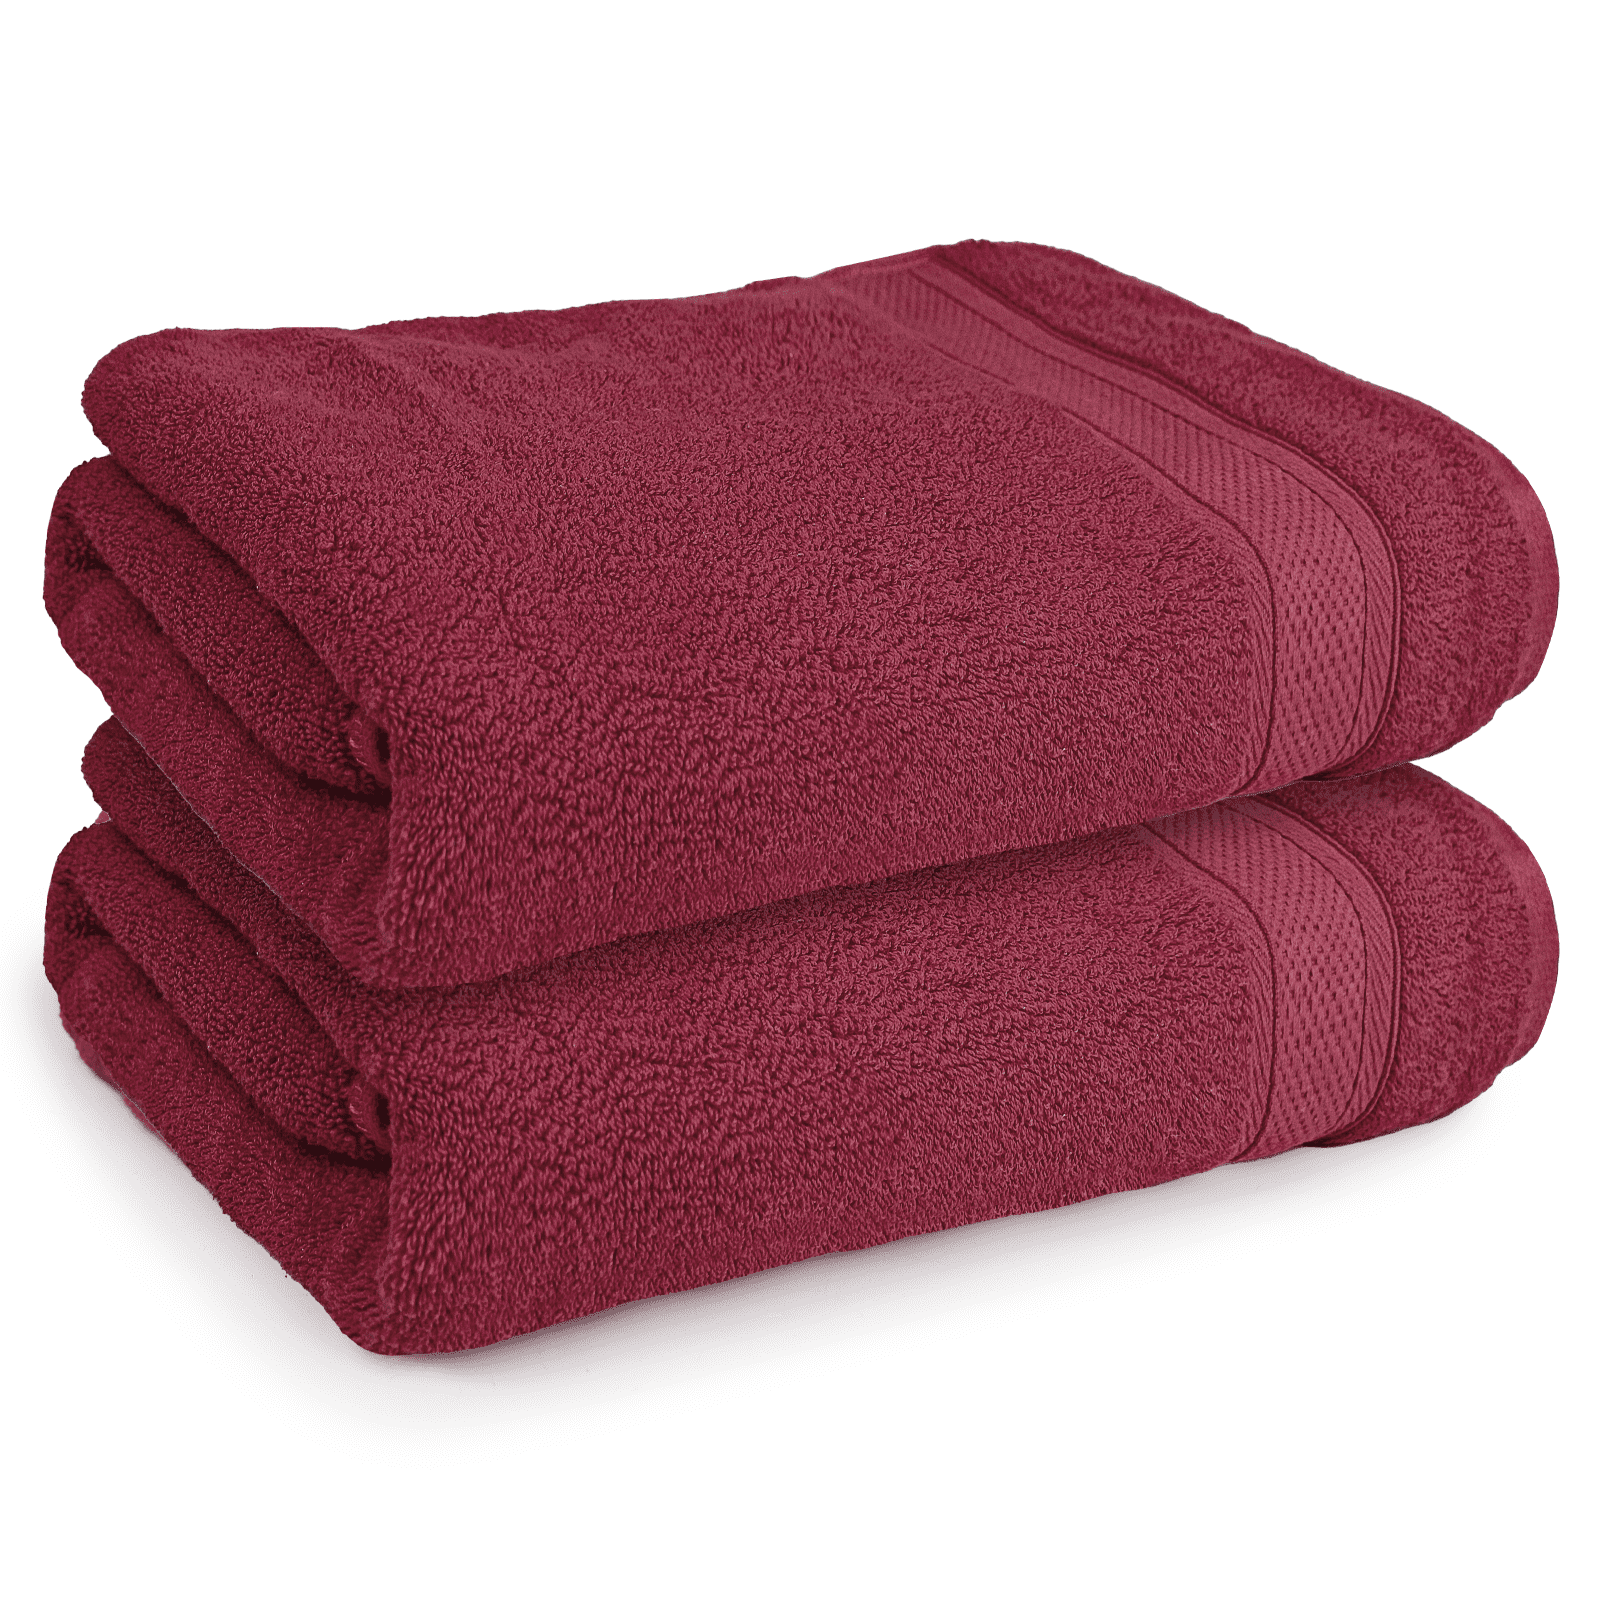 Trident Finesse Ultra Soft, Extra Large, 4 Piece Bath Towels, Super Soft,  Extra Absorbent, 625 GSM, White 